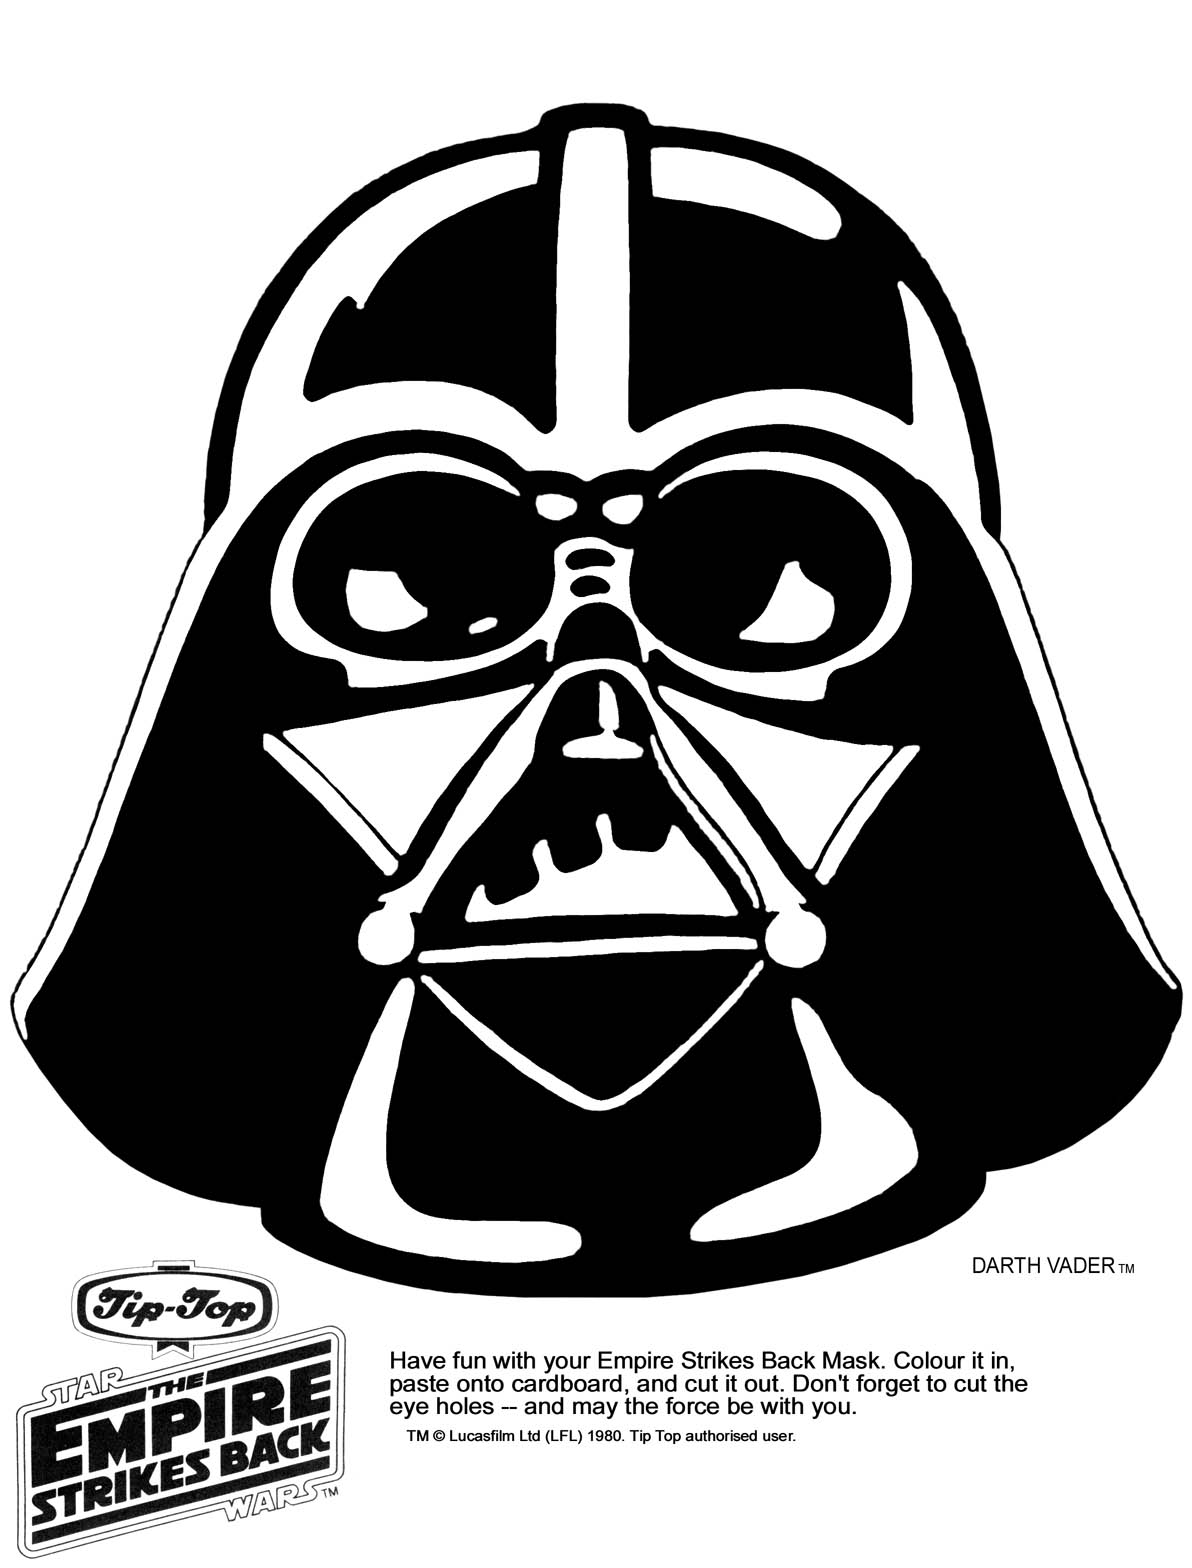 Darth Vader Helmet Coloring Page - High Quality Coloring Pages